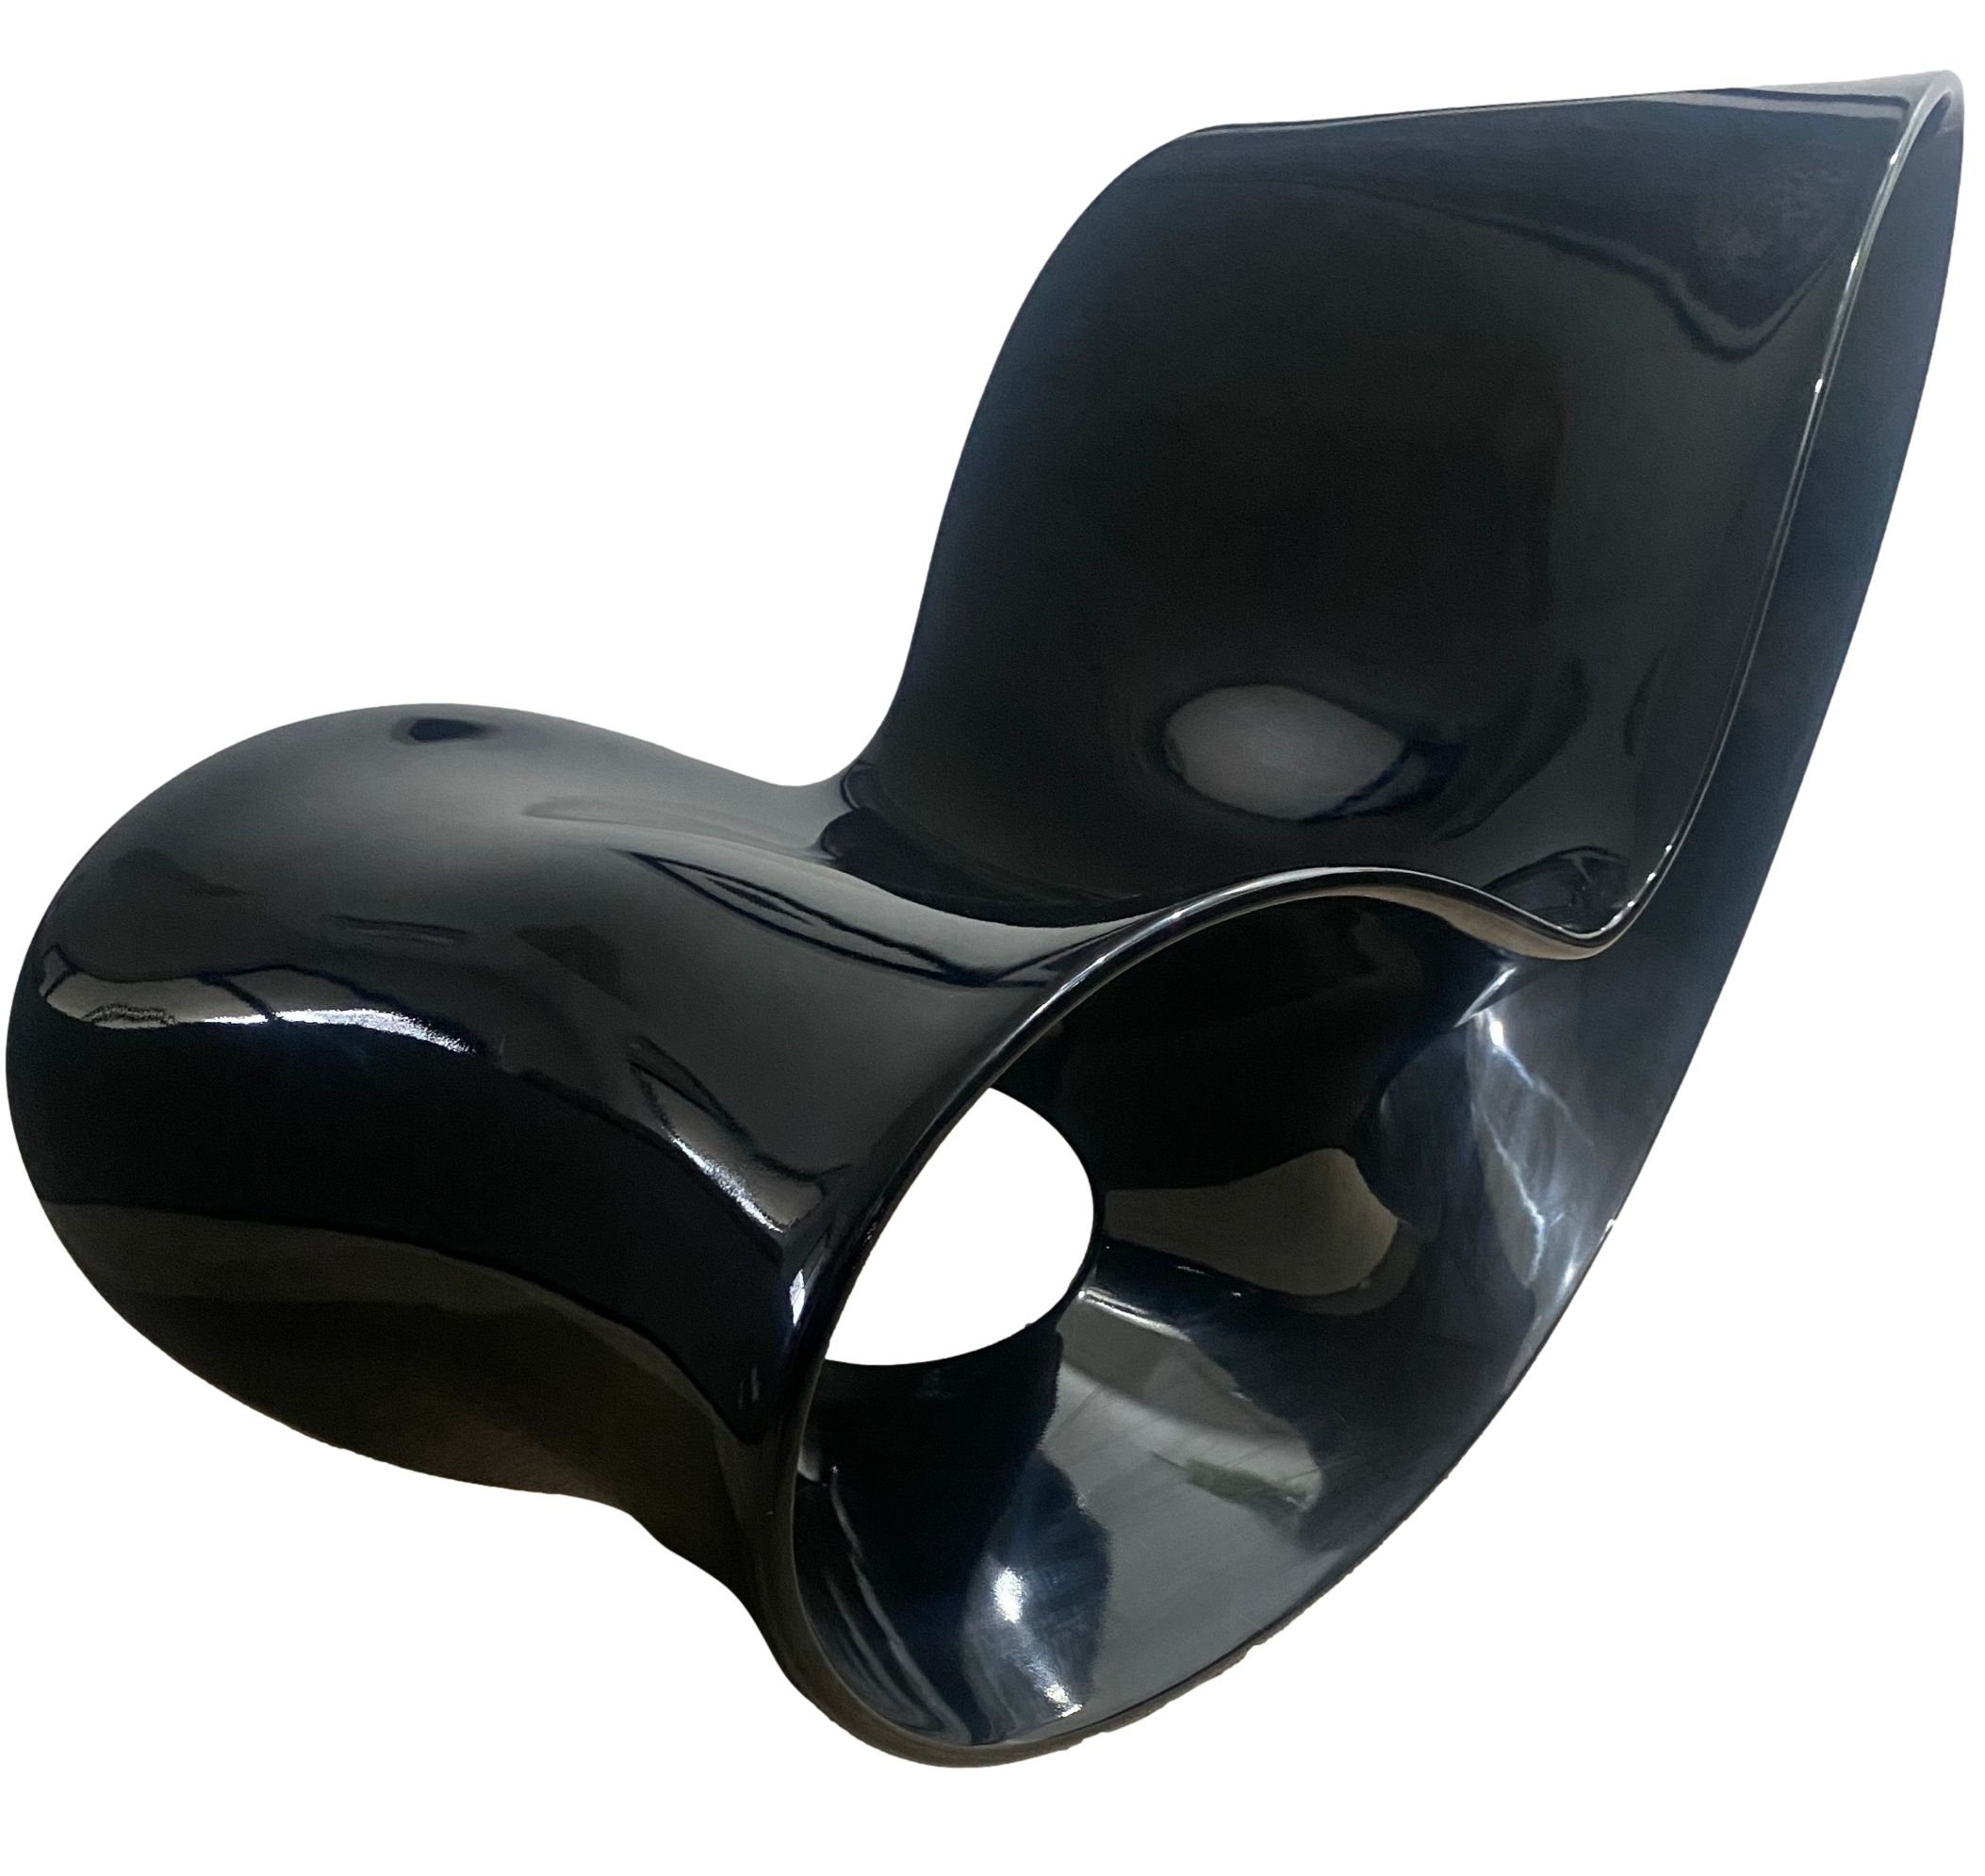 Voido Rocking Chair by Ron Arad